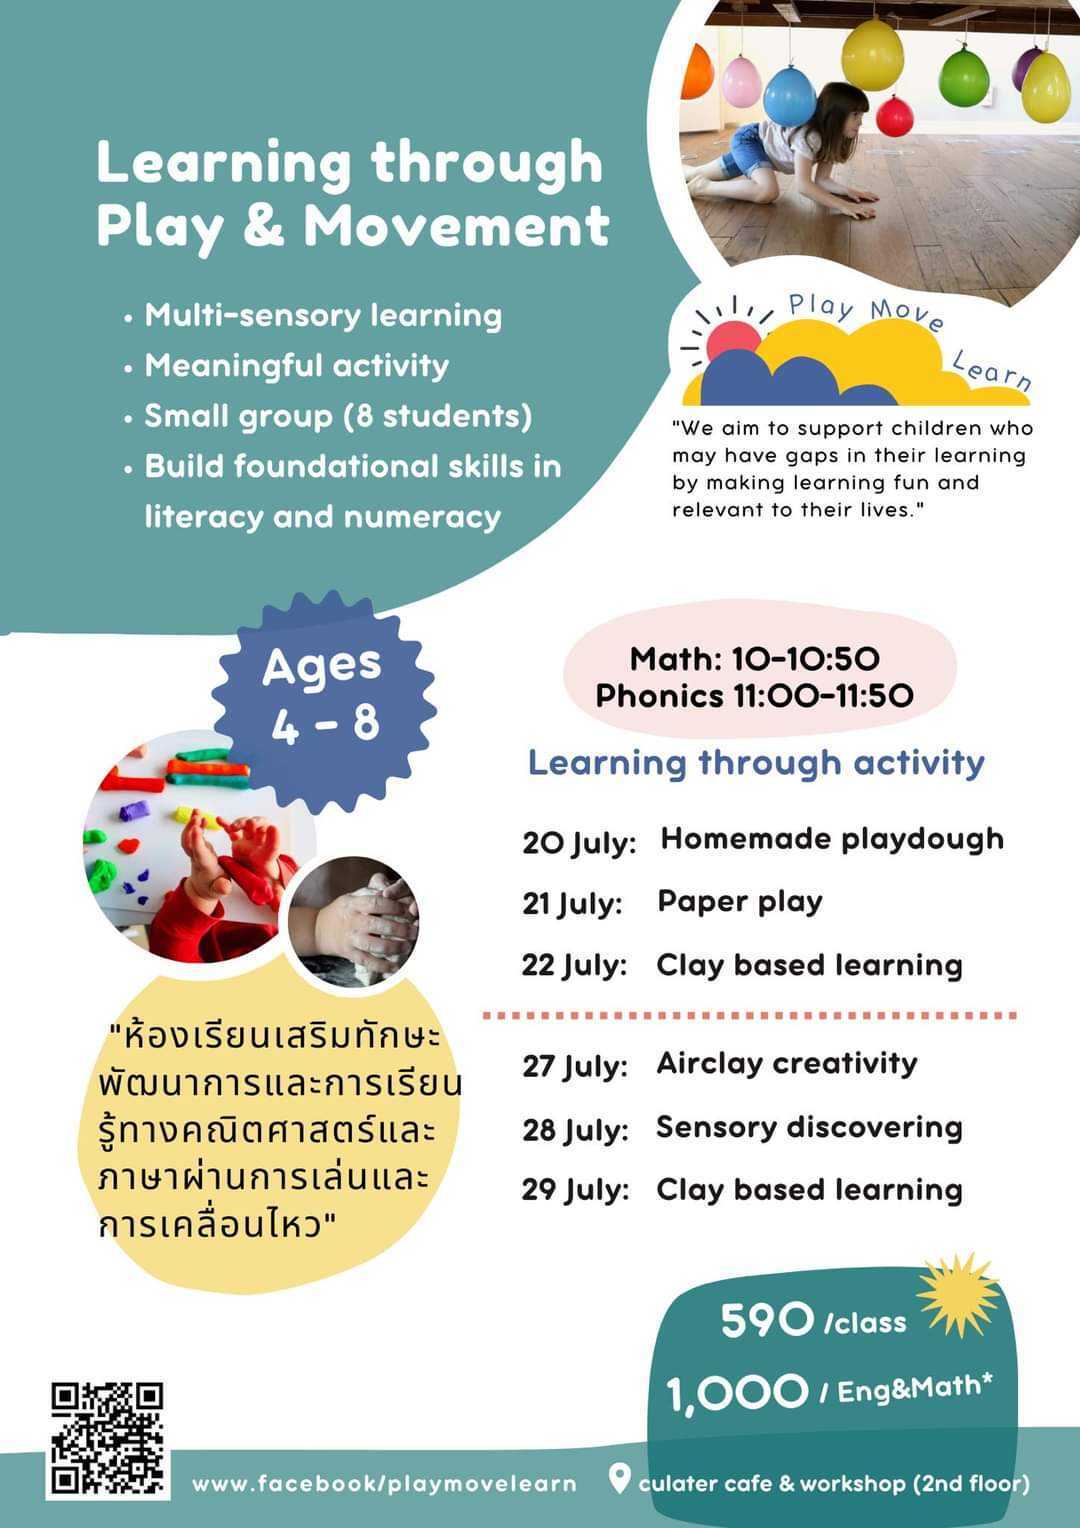 Play Move Learn - Learning Through Play & Movement